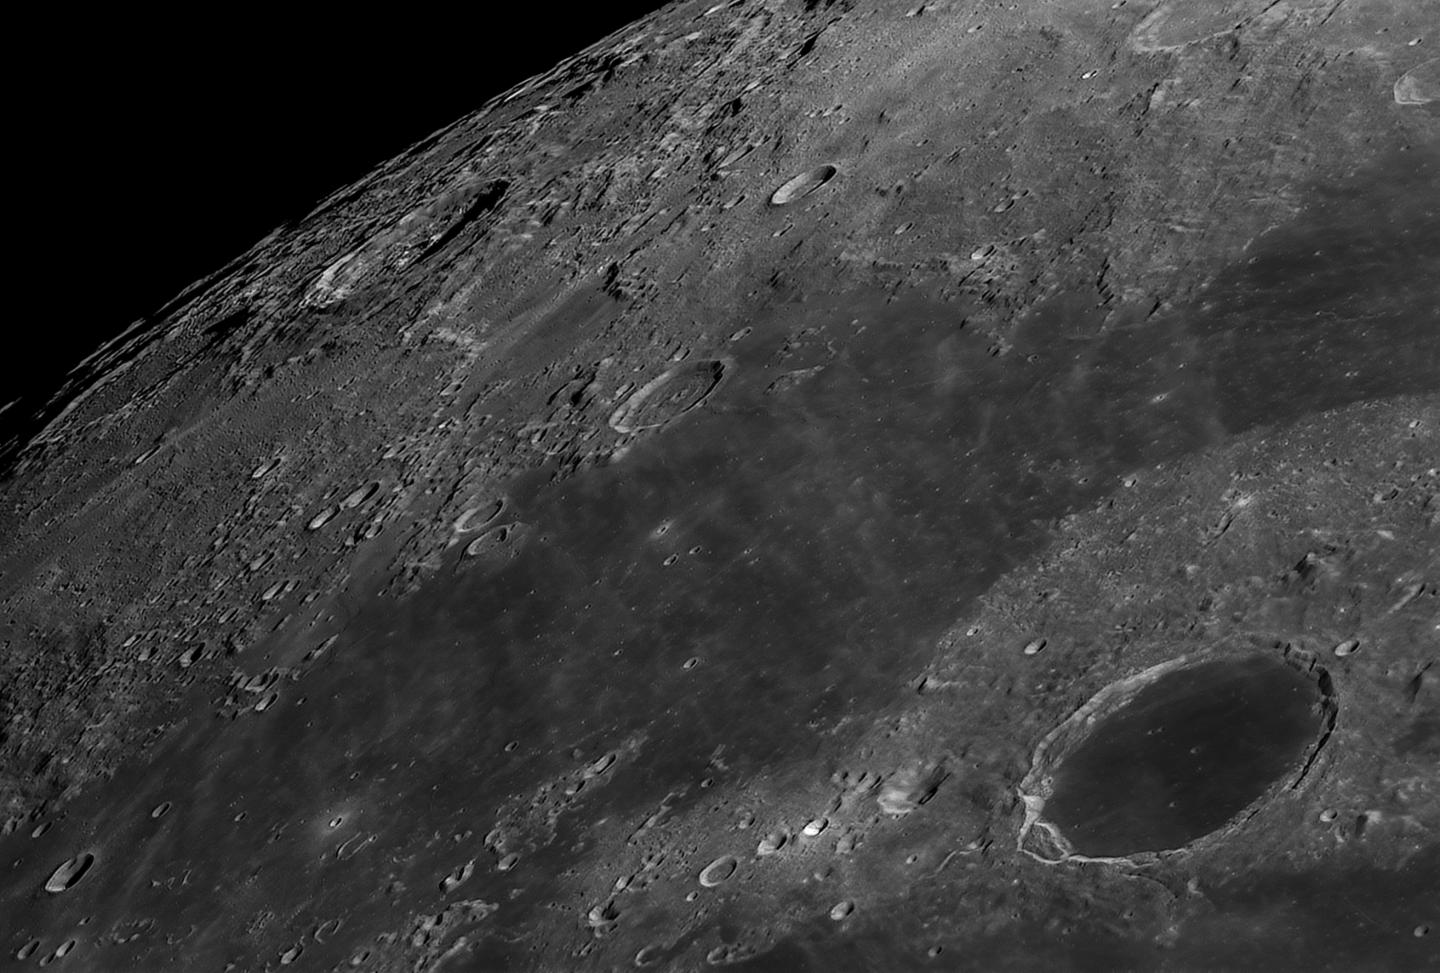 Plato crater on the Moon